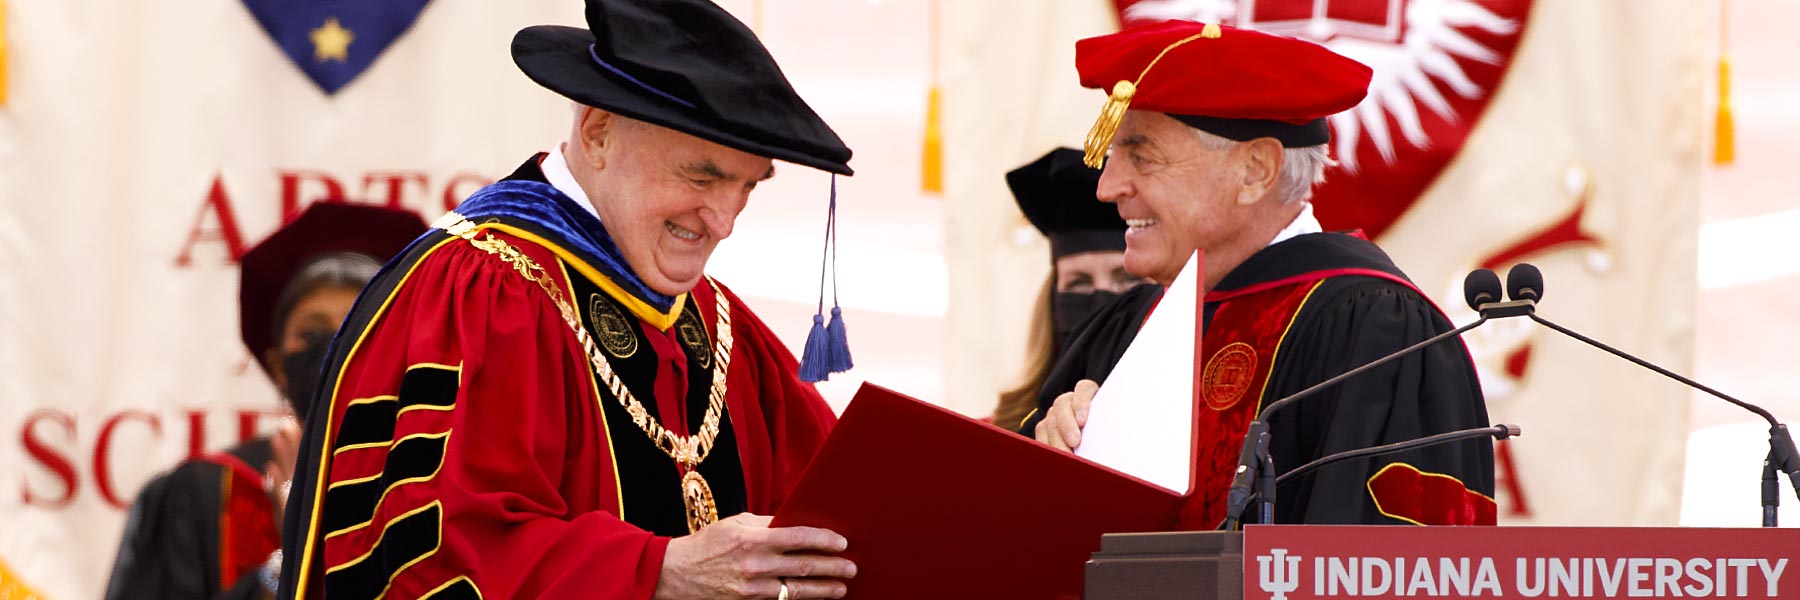 Michael McRobbie being honored at commencement